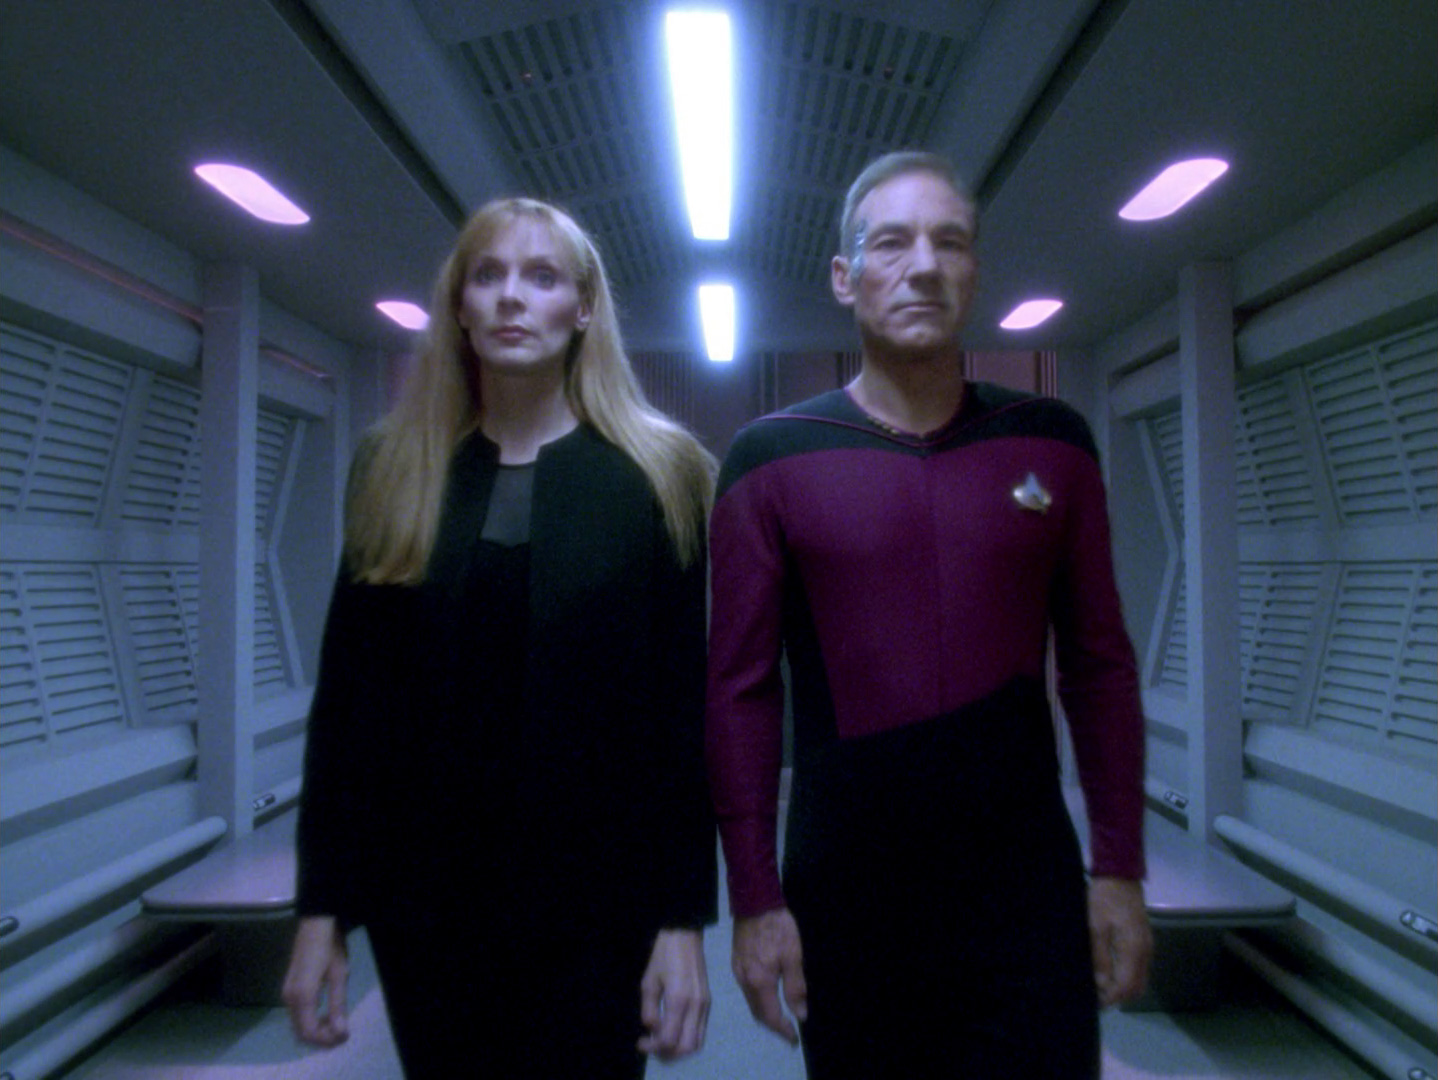 Crusher_and_Picard_2354.jpg